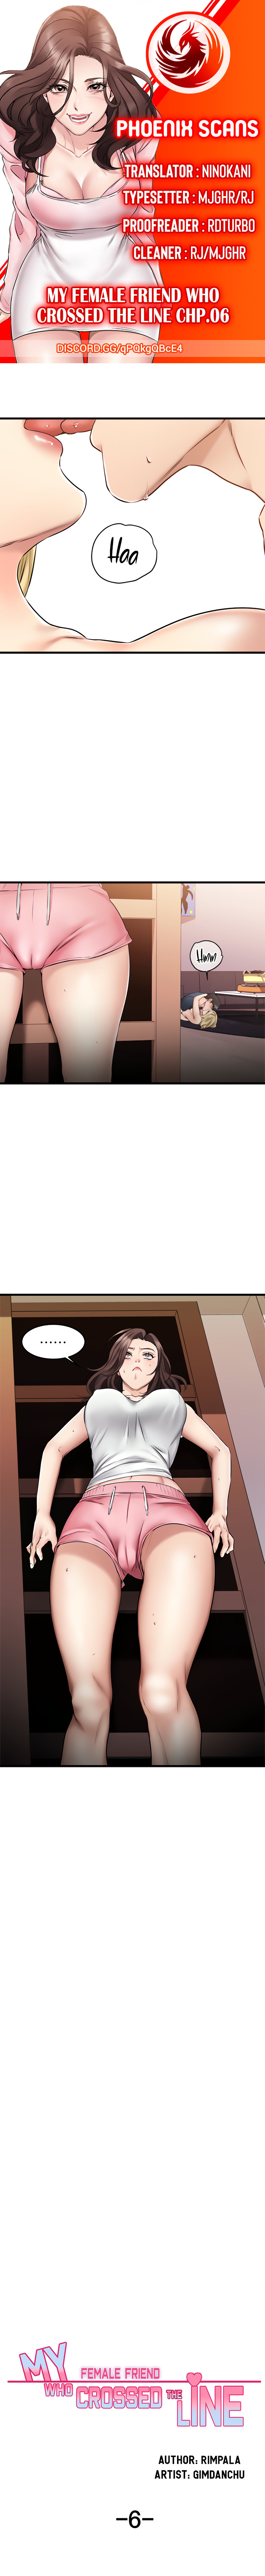 My Female Friend Who Crossed The Line - Chapter 6 Page 1